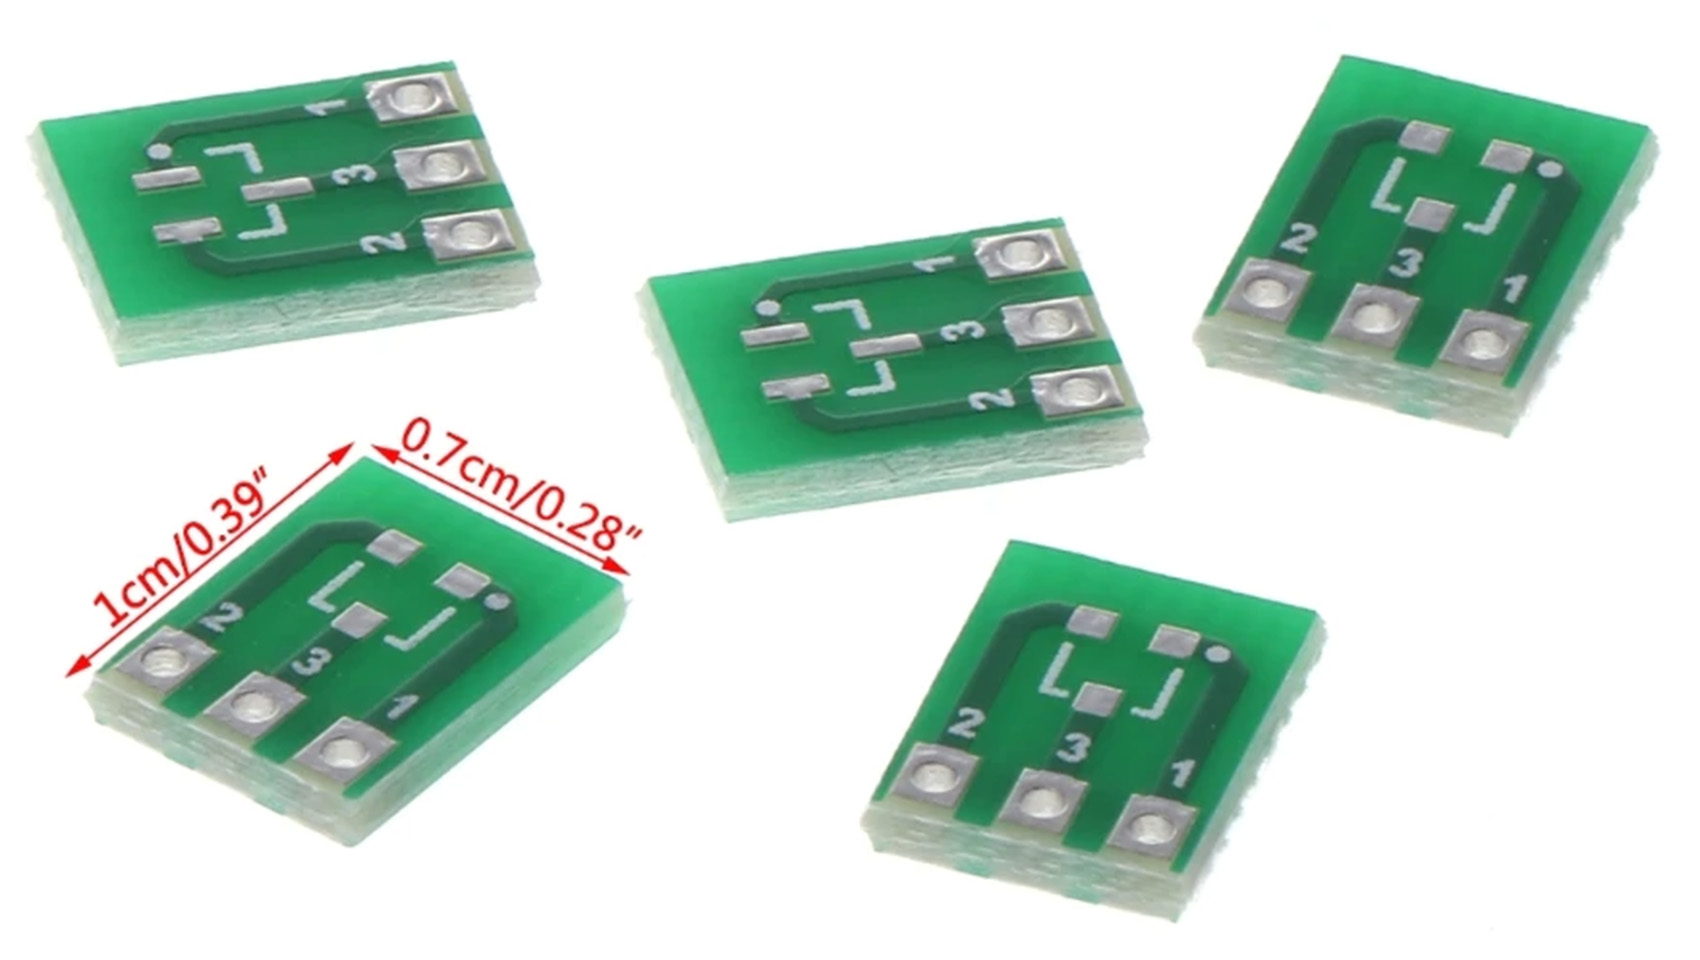 Double-Sided SMD SOT23-3 to DIP SIP3 Adapter PCB Board DIY Converter UK Seller 